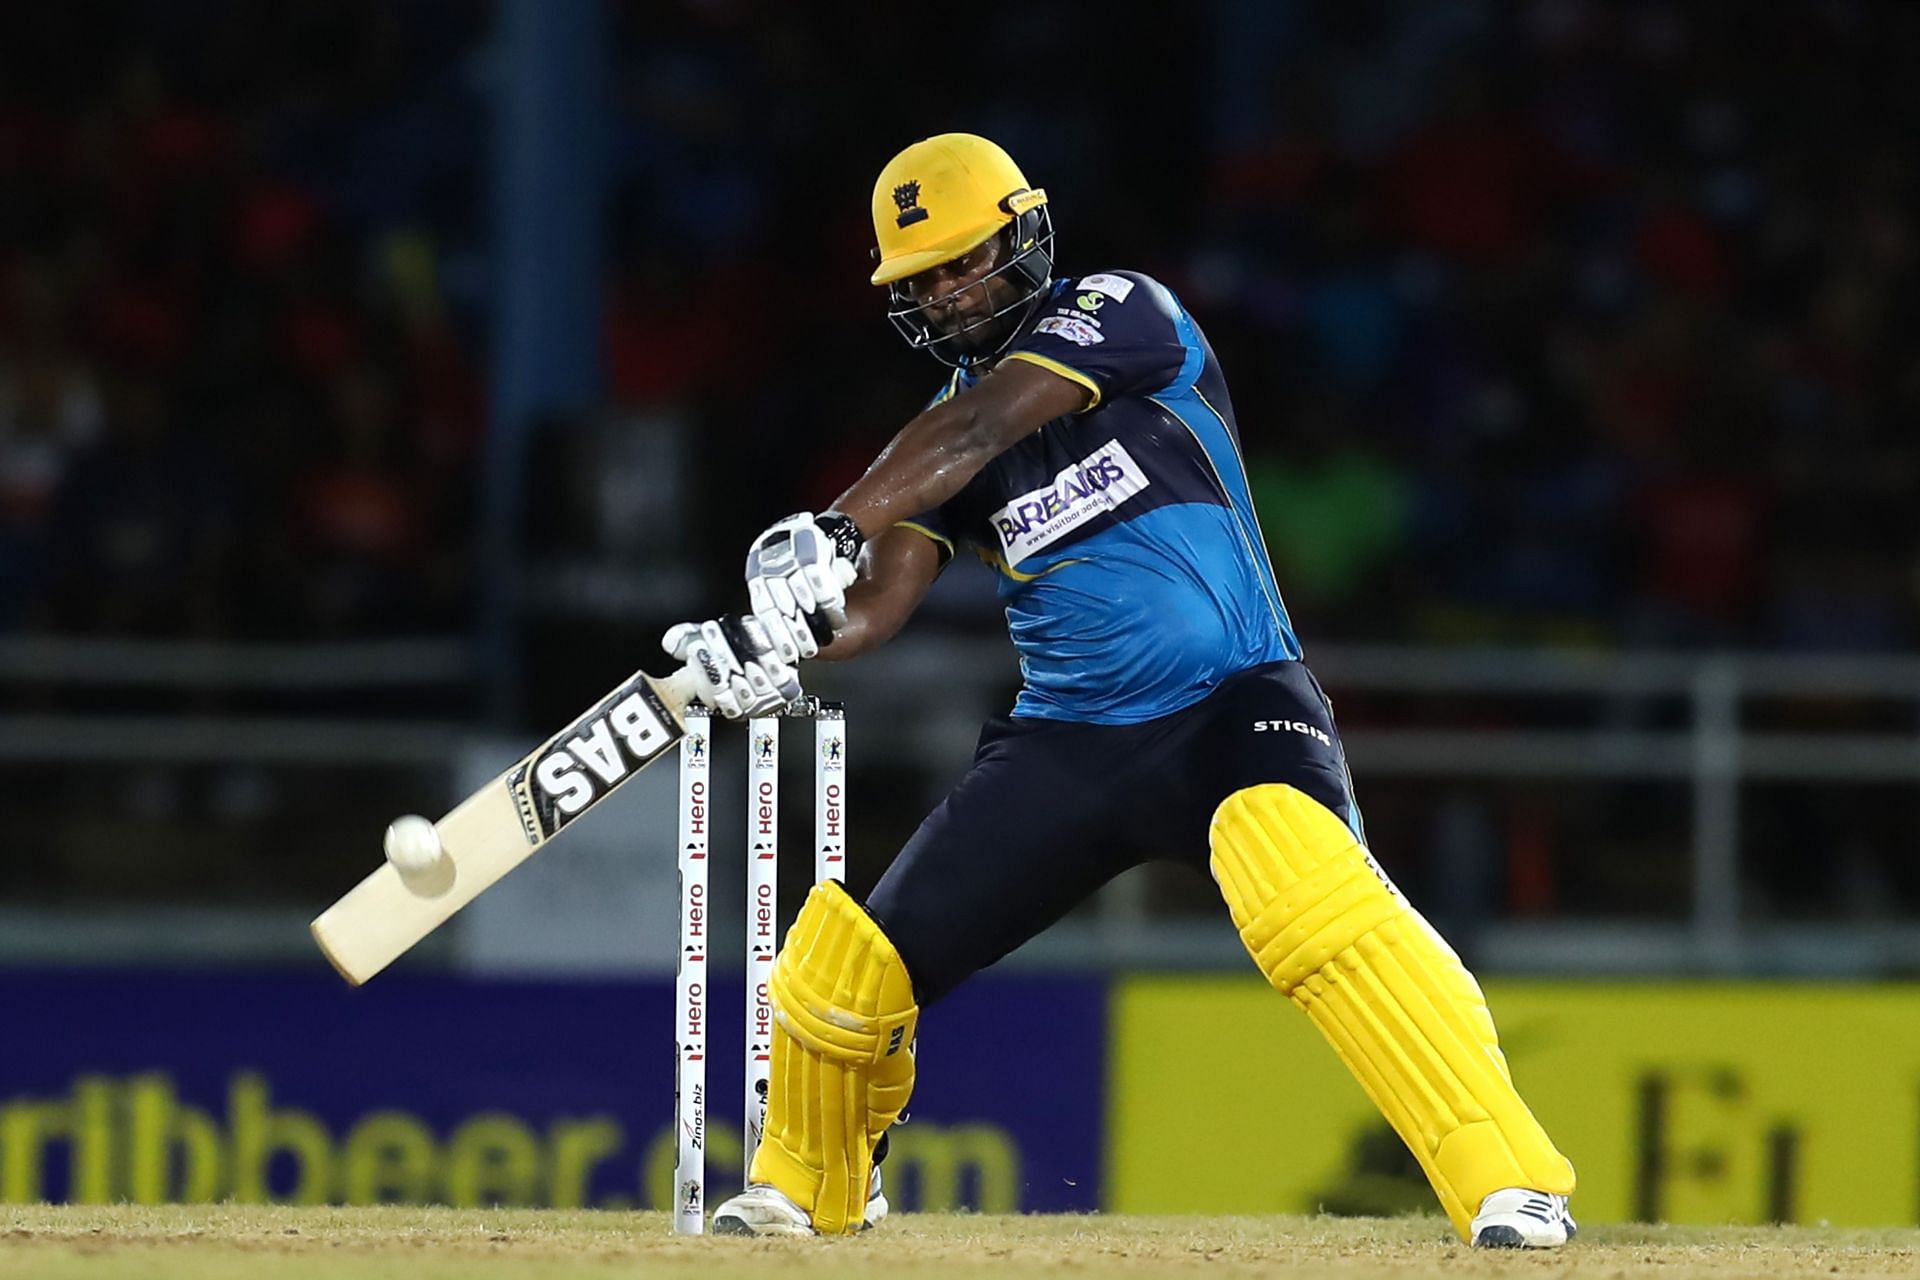 Johnson Charles is the leading run-scorer in the CPL 2022